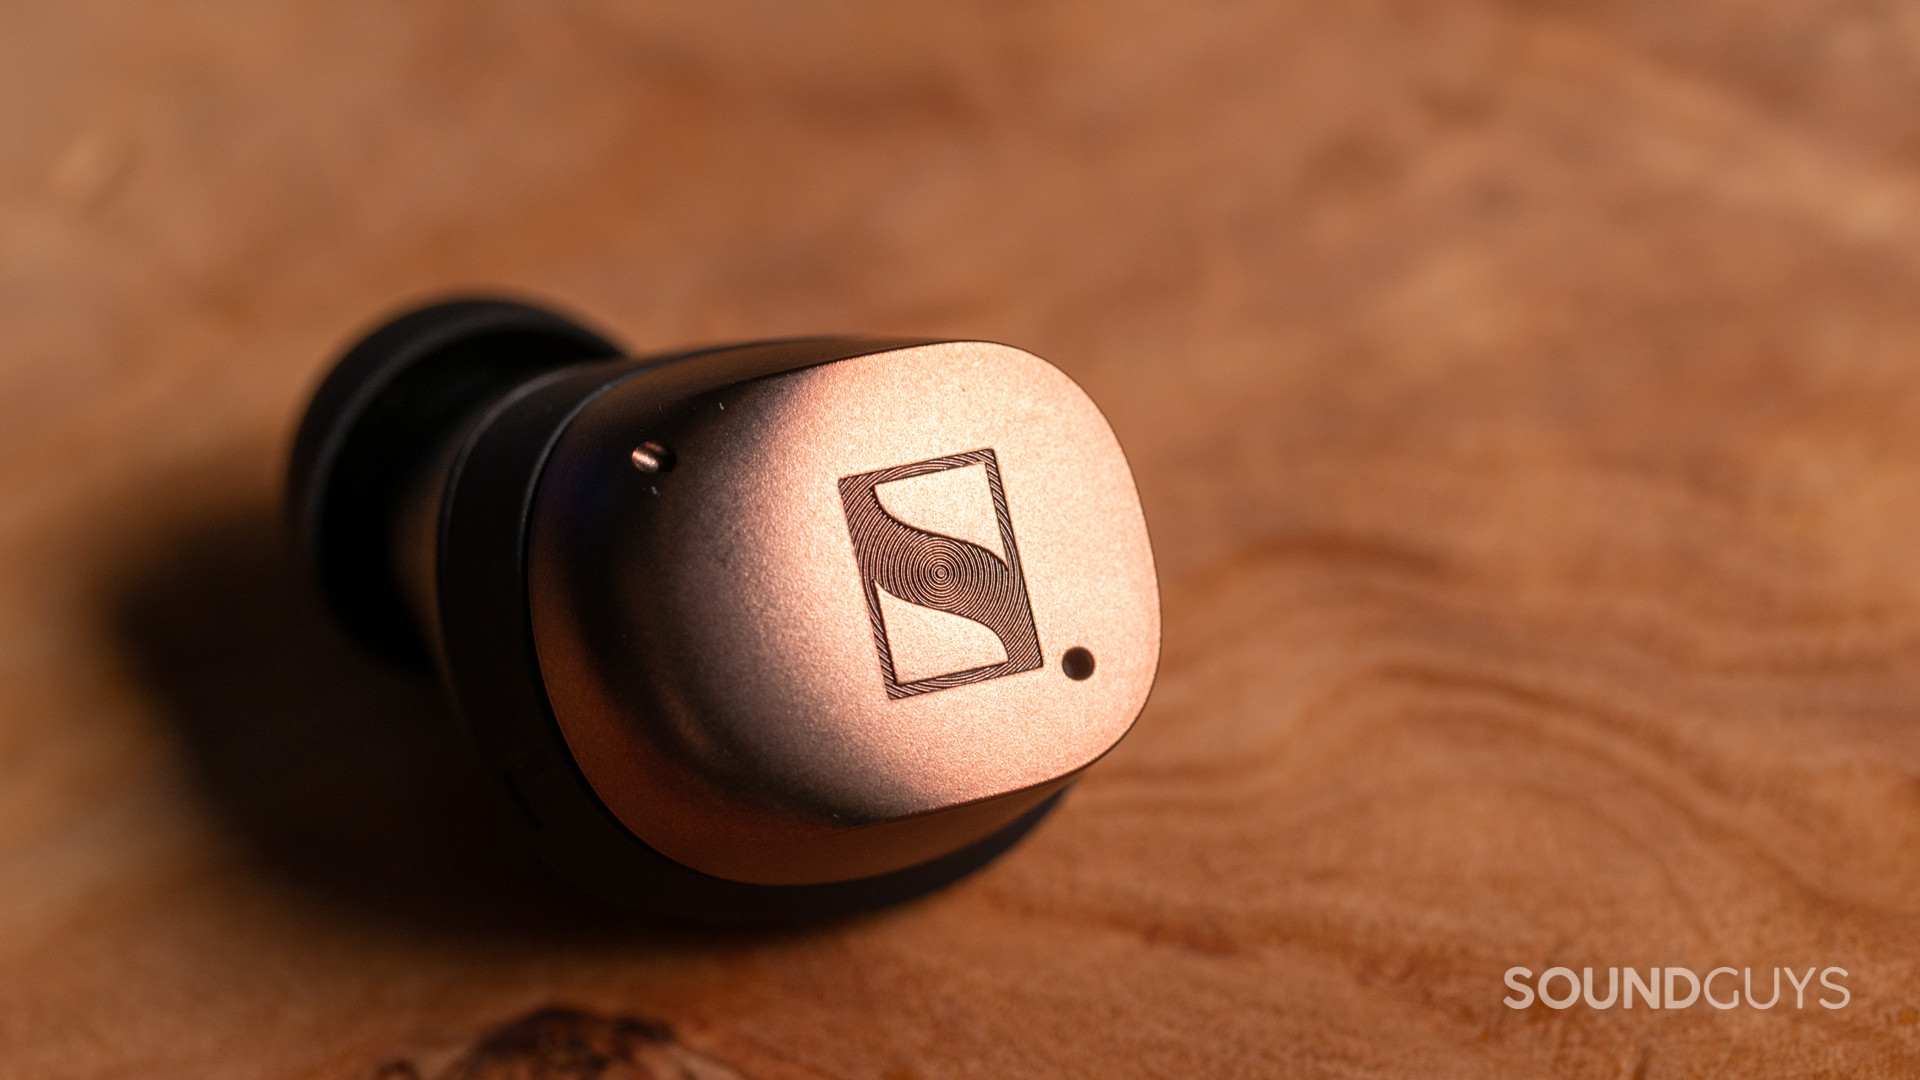 A close-up photo of the Sennheiesr MOMENTUM True Wireless 4's earbud on a wooden table.